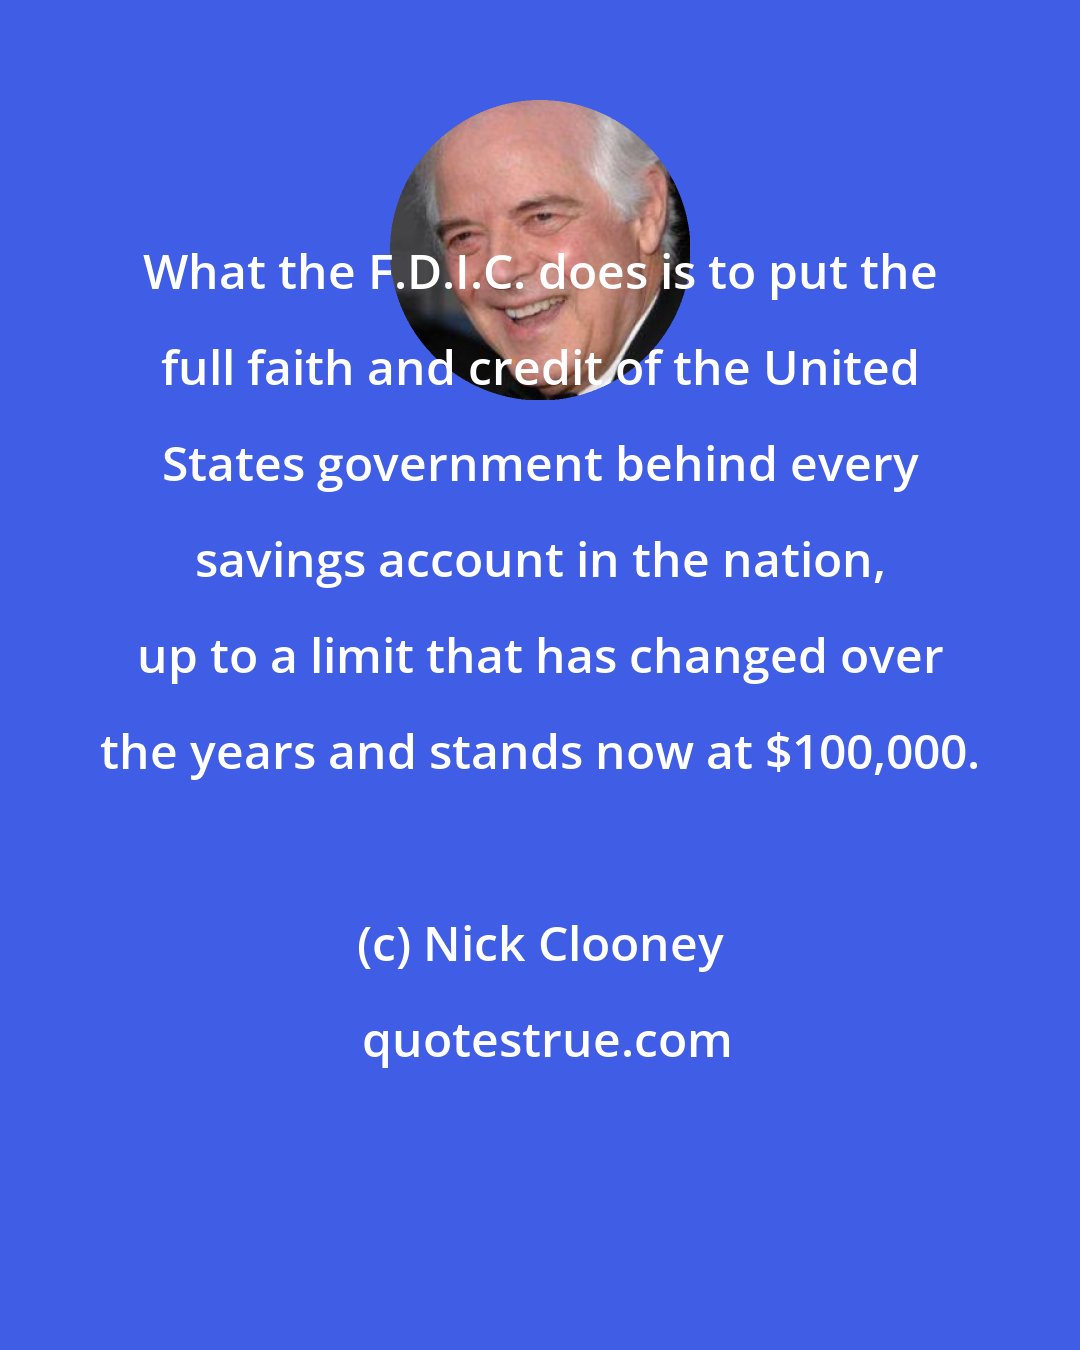 Nick Clooney: What the F.D.I.C. does is to put the full faith and credit of the United States government behind every savings account in the nation, up to a limit that has changed over the years and stands now at $100,000.